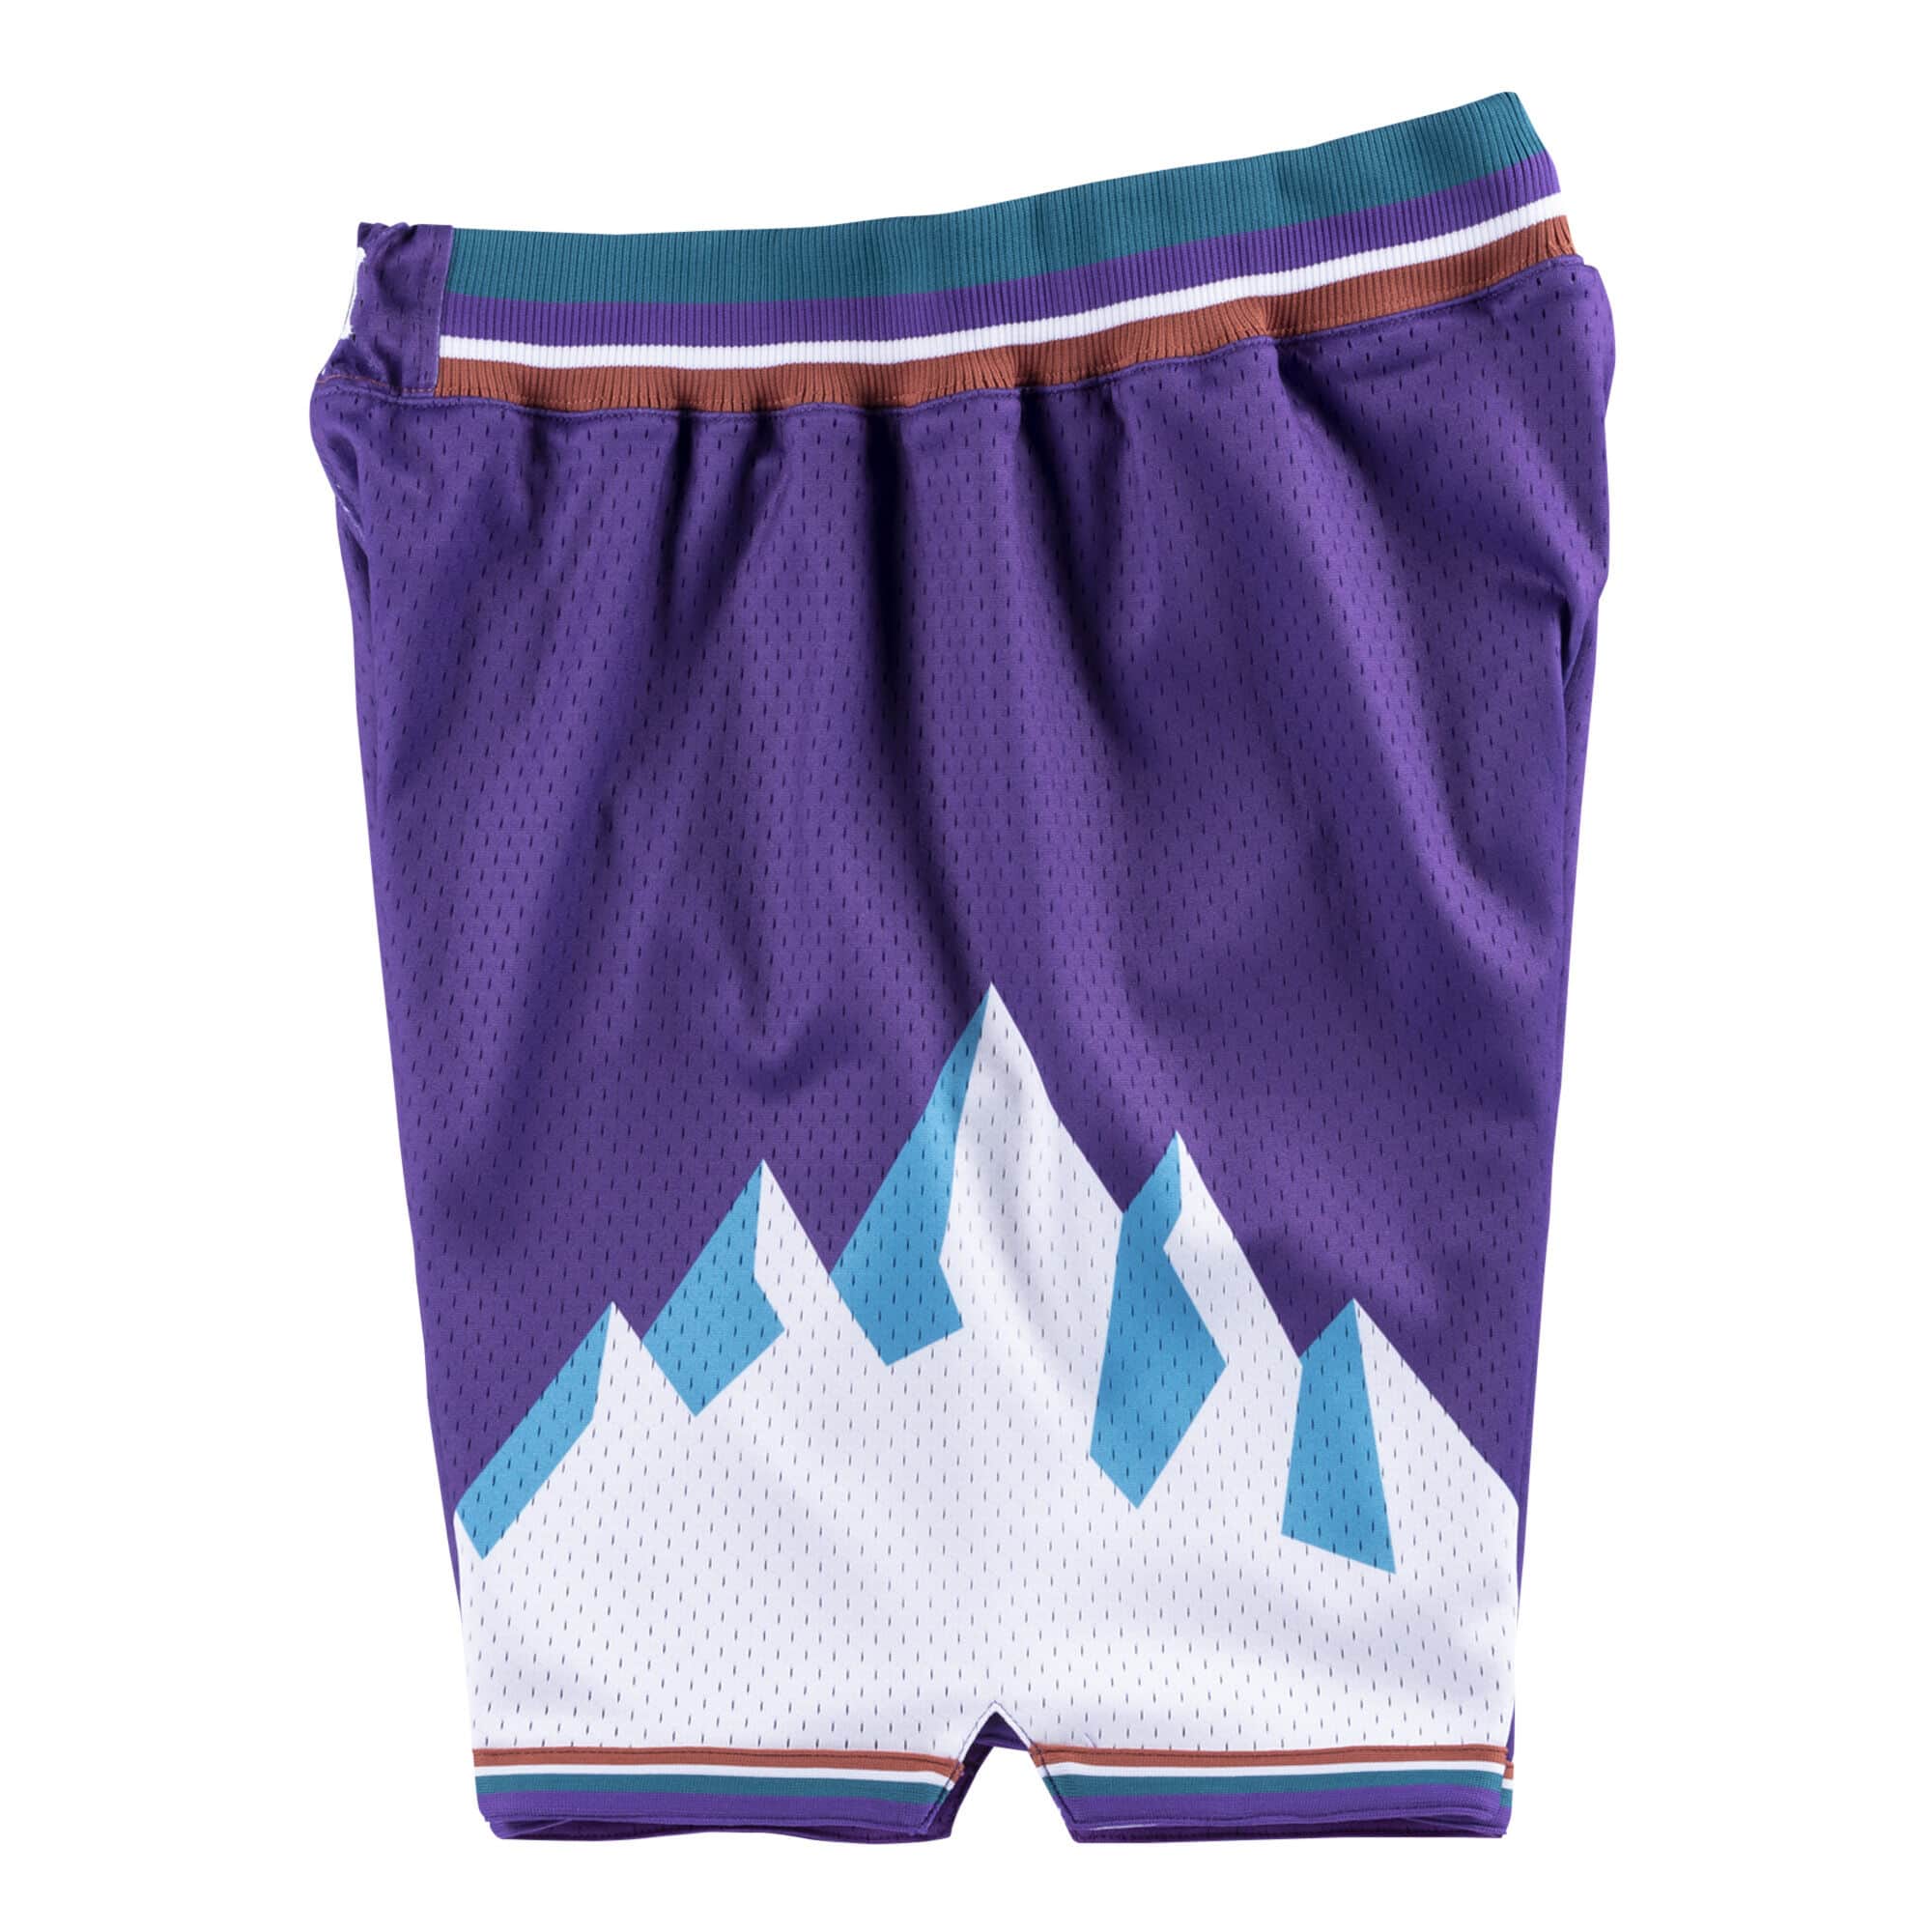 Mitchell & Ness Active Shorts for Men